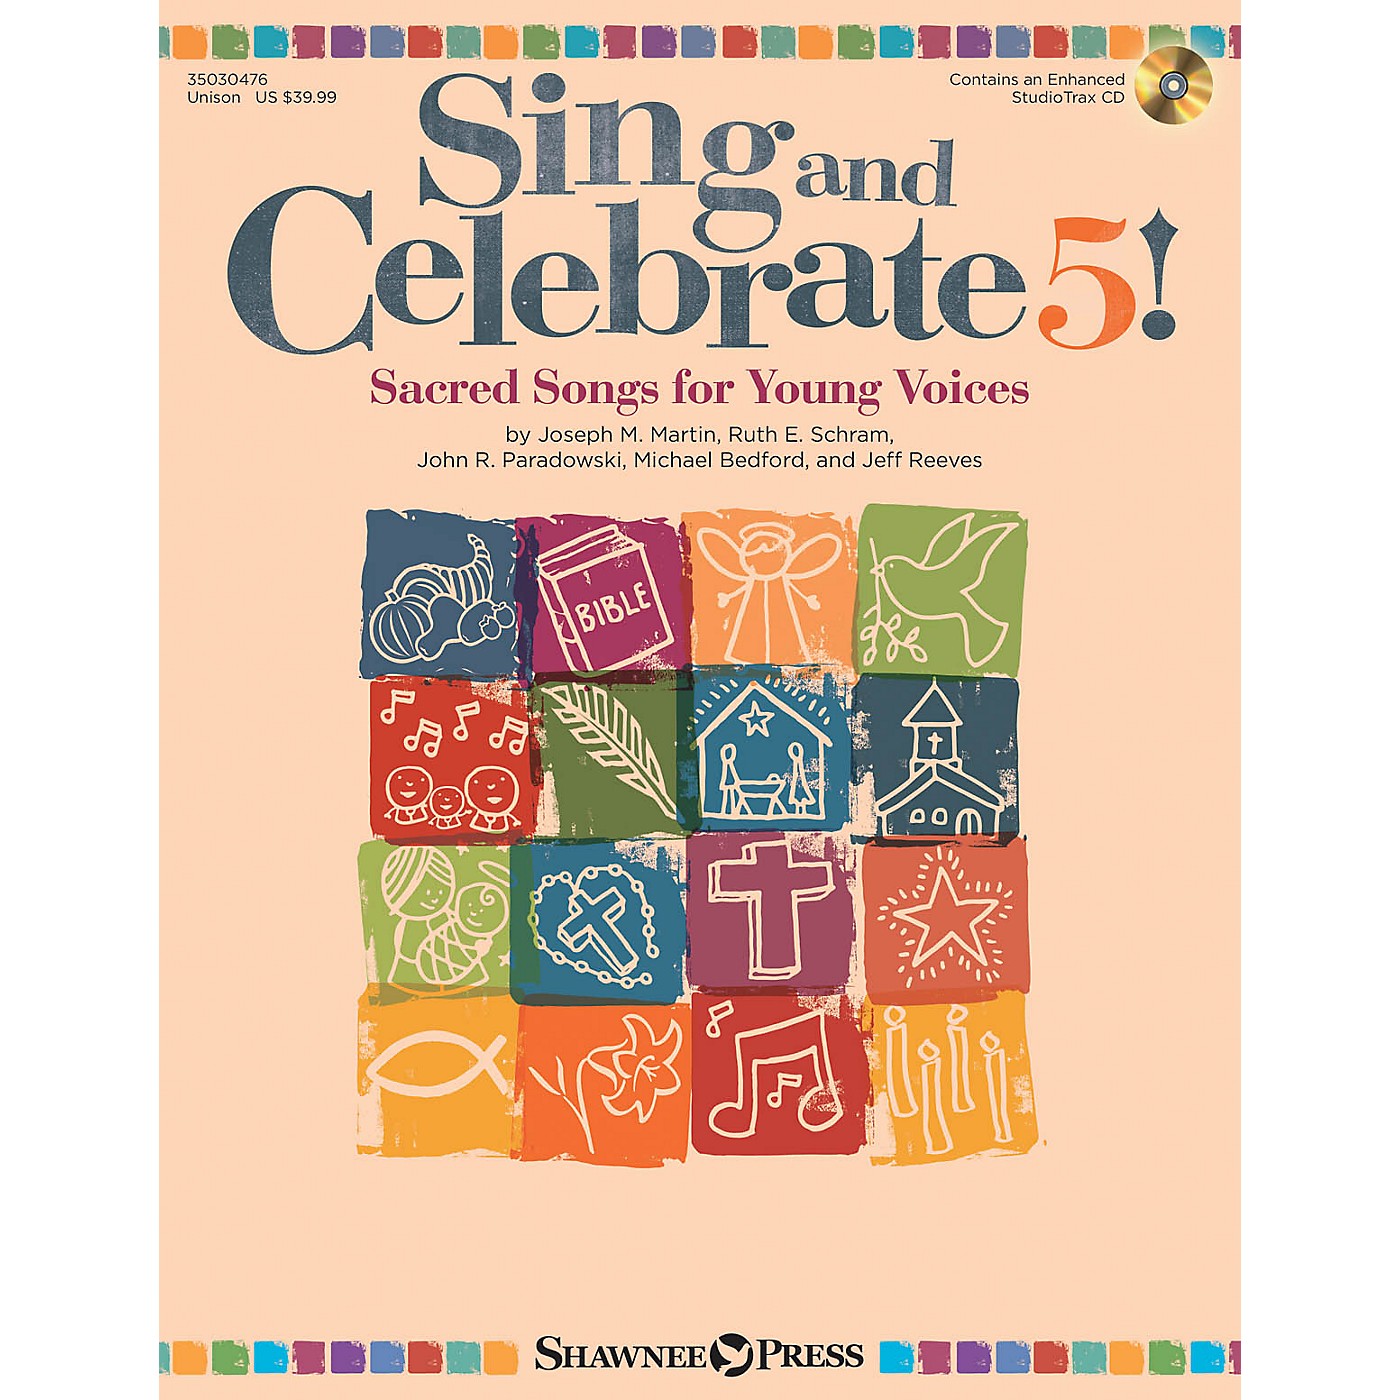 Shawnee Press Sing and Celebrate 5! Sacred Songs for Young Voices Unison Book/CD composed by John R. Paradowski thumbnail